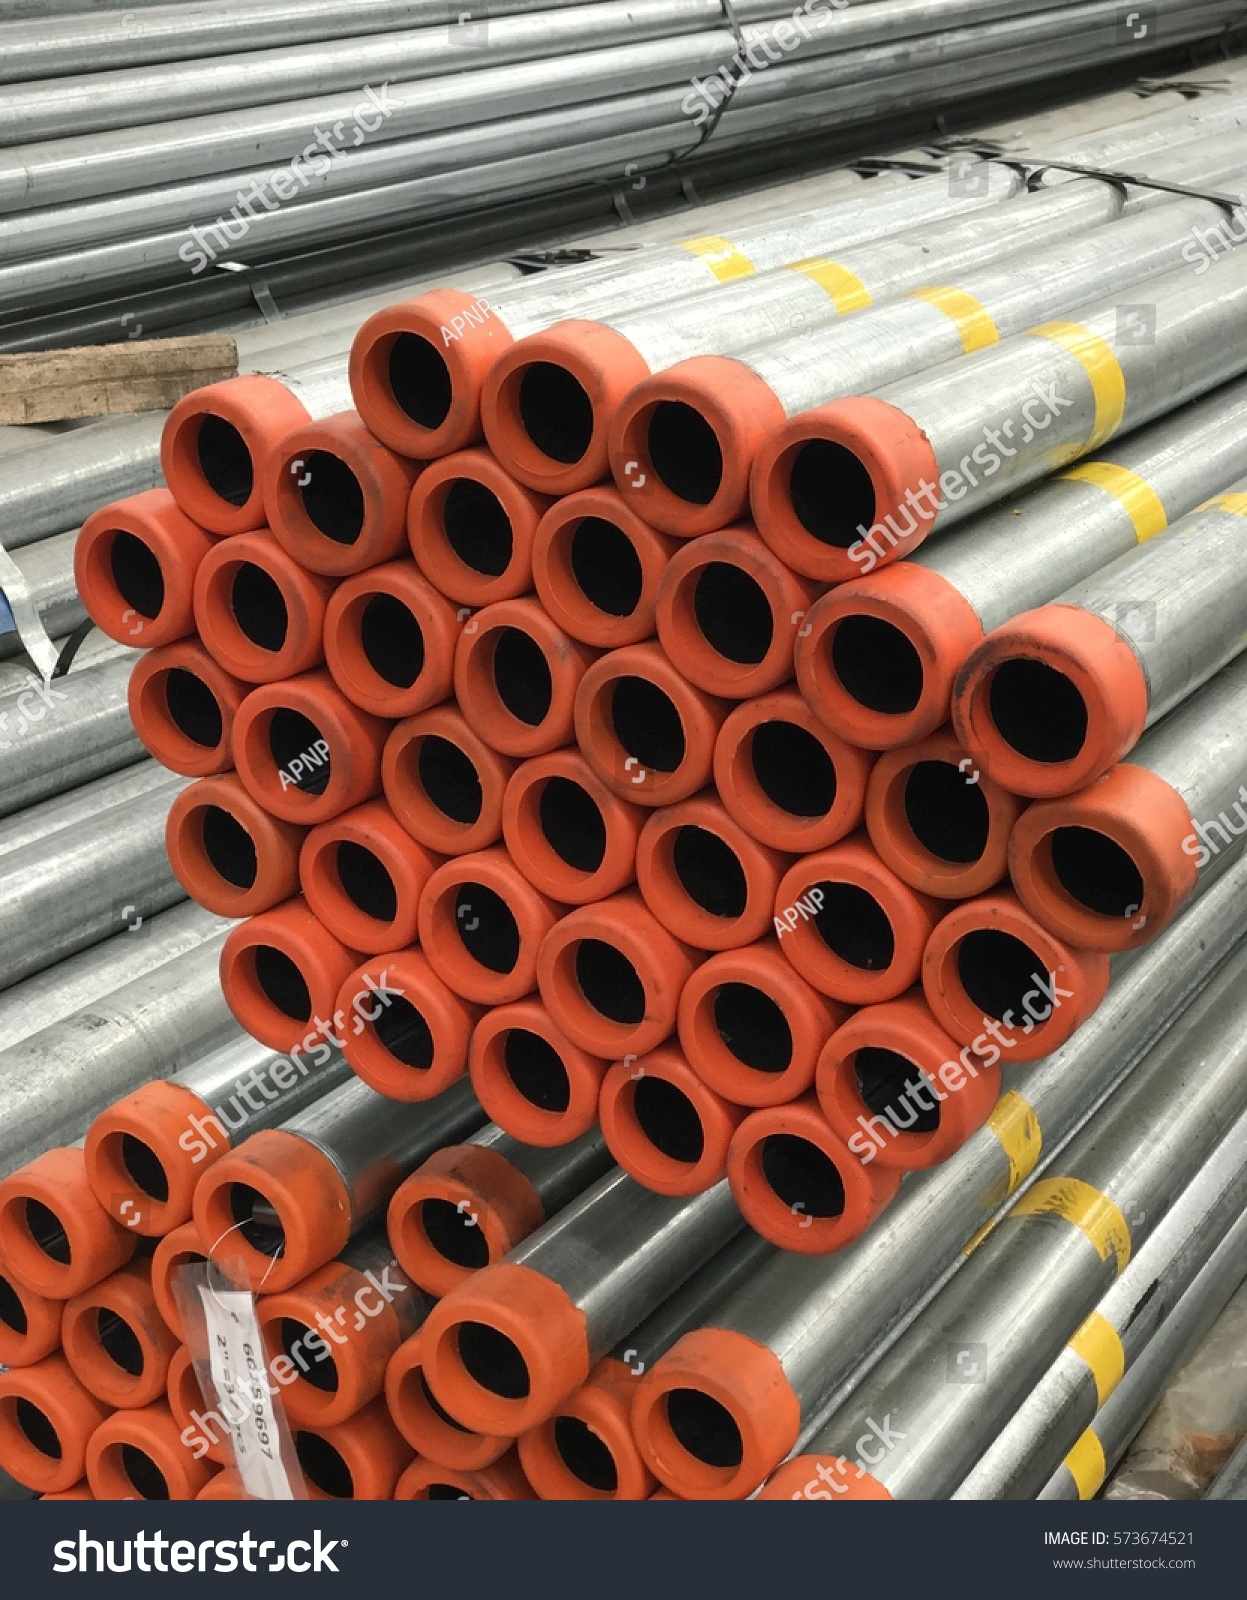 Red Surface Industrial Steel Pipes Stock Photo 573674521 - Shutterstock